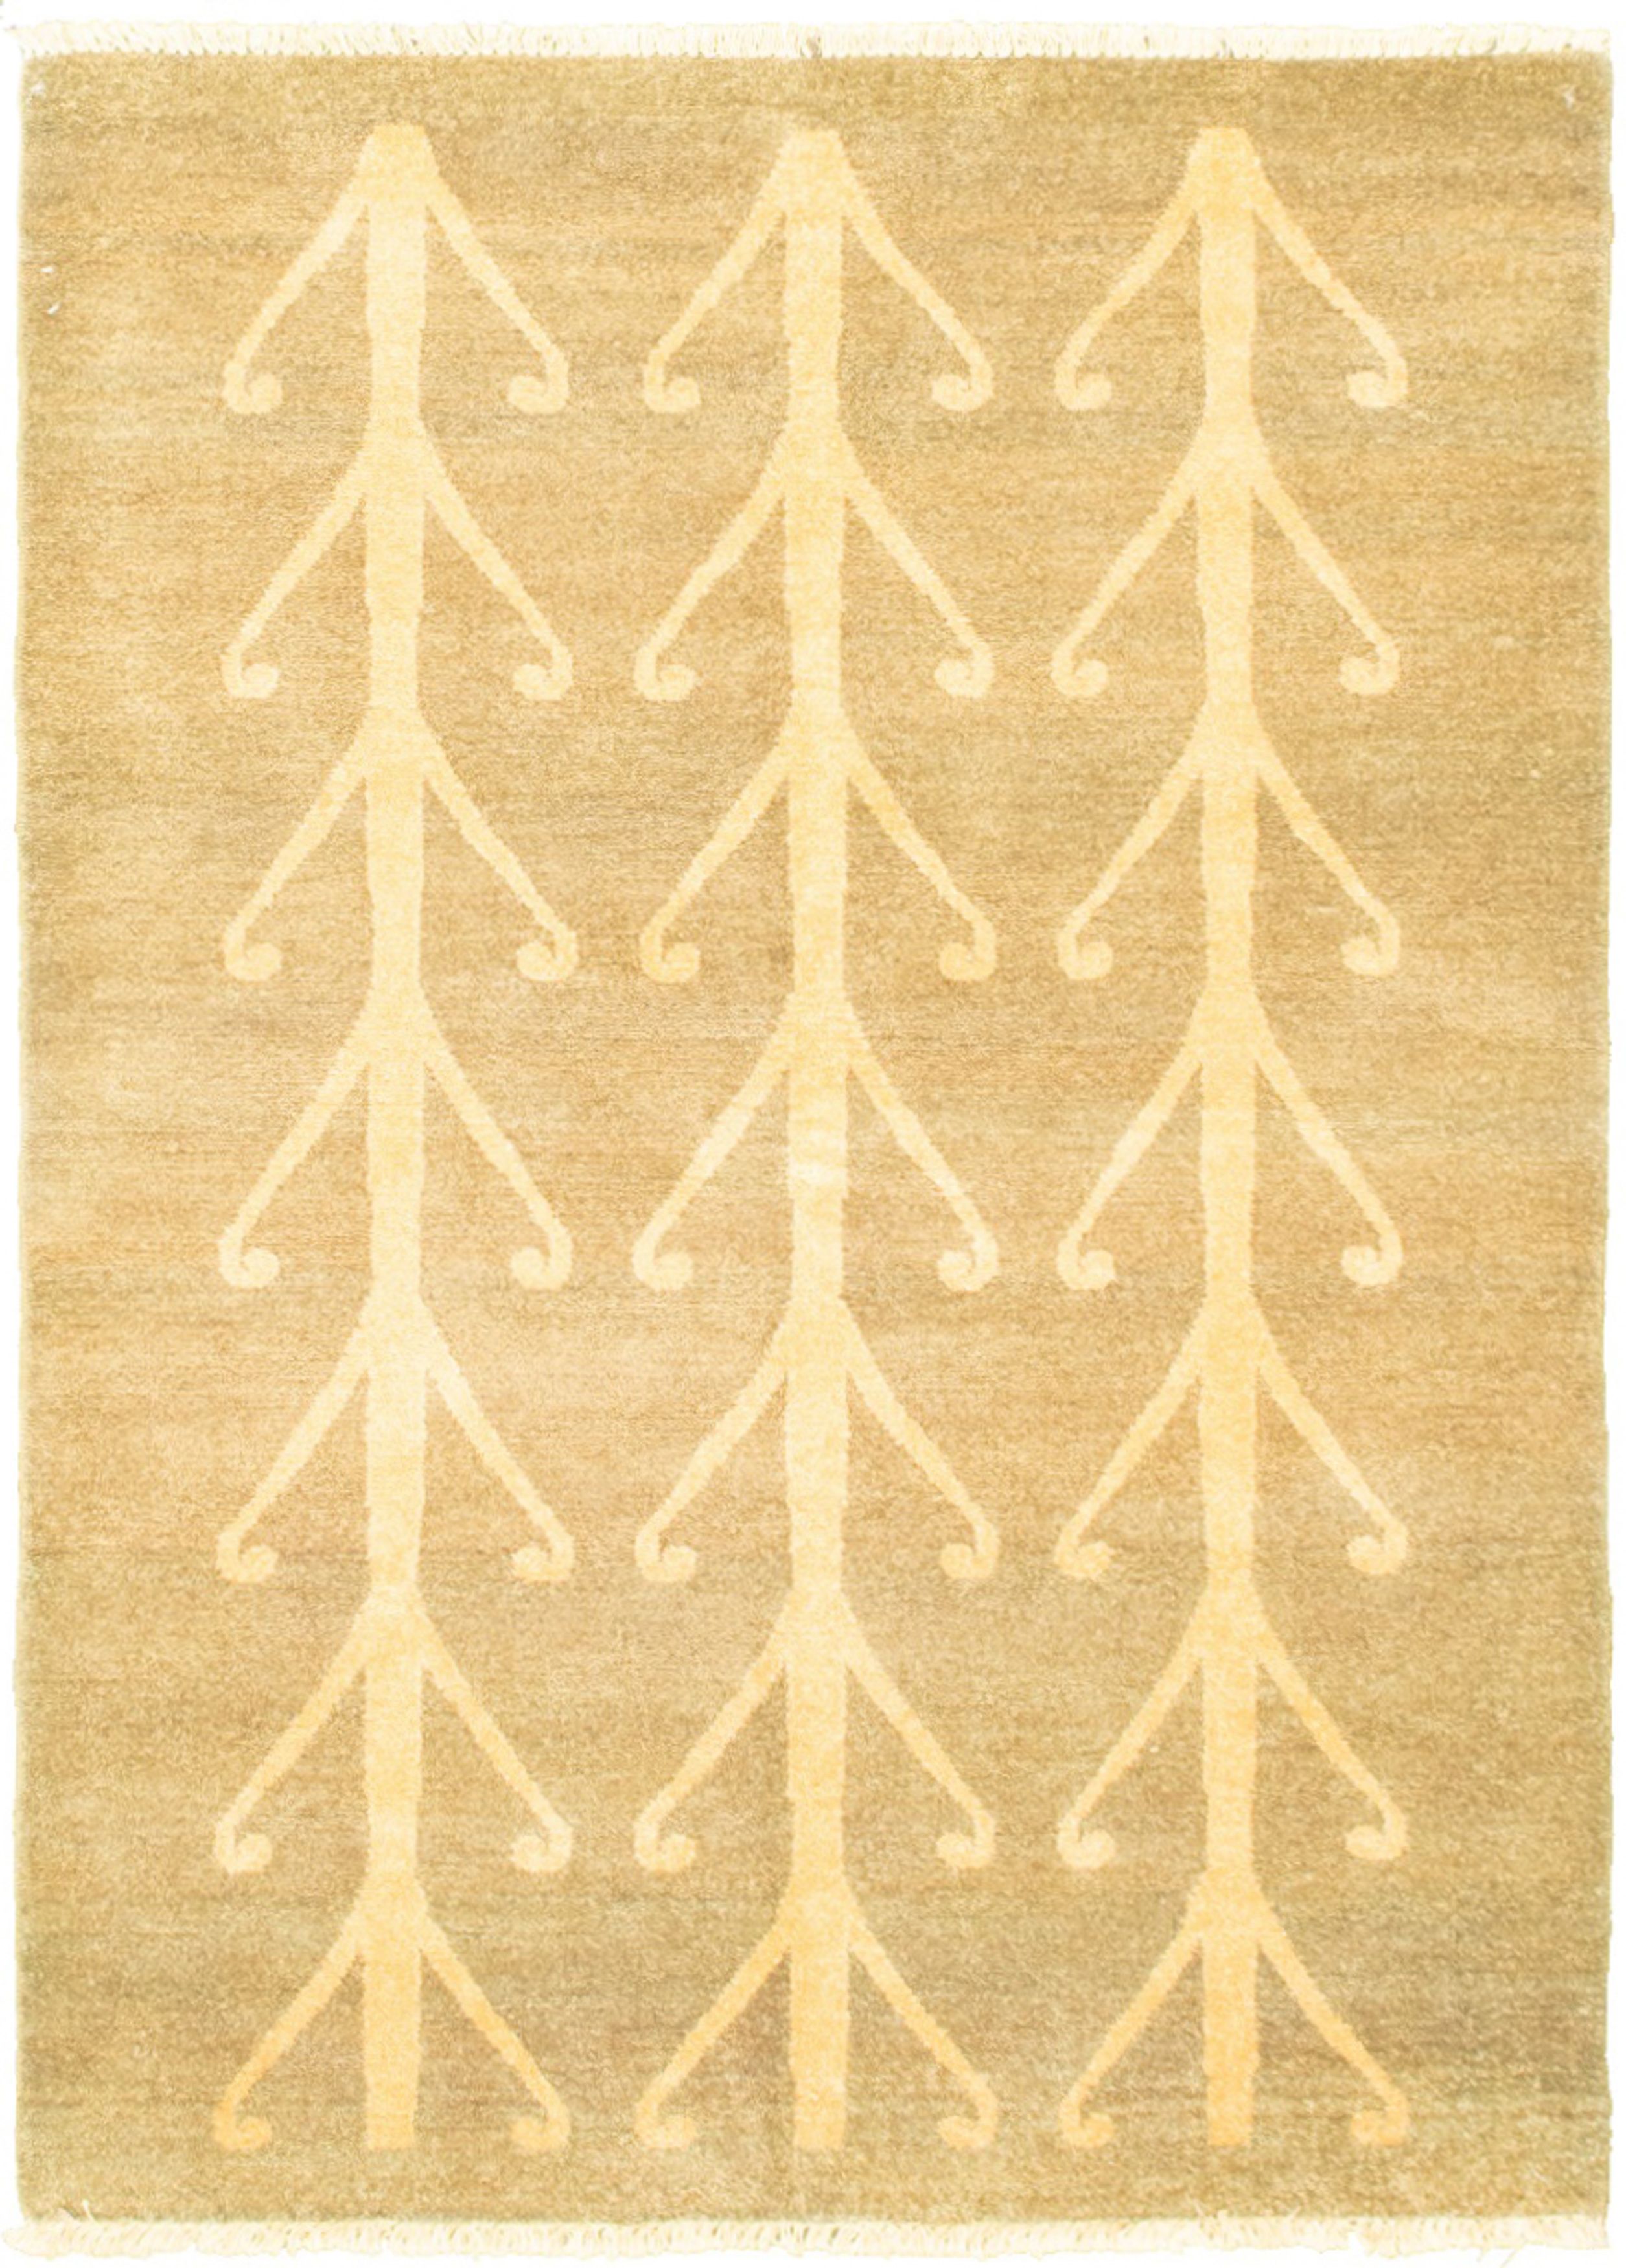 Hand-knotted Peshawar Ziegler Olive Wool Rug 4'2" x 5'10" Size: 4'2" x 5'10"  